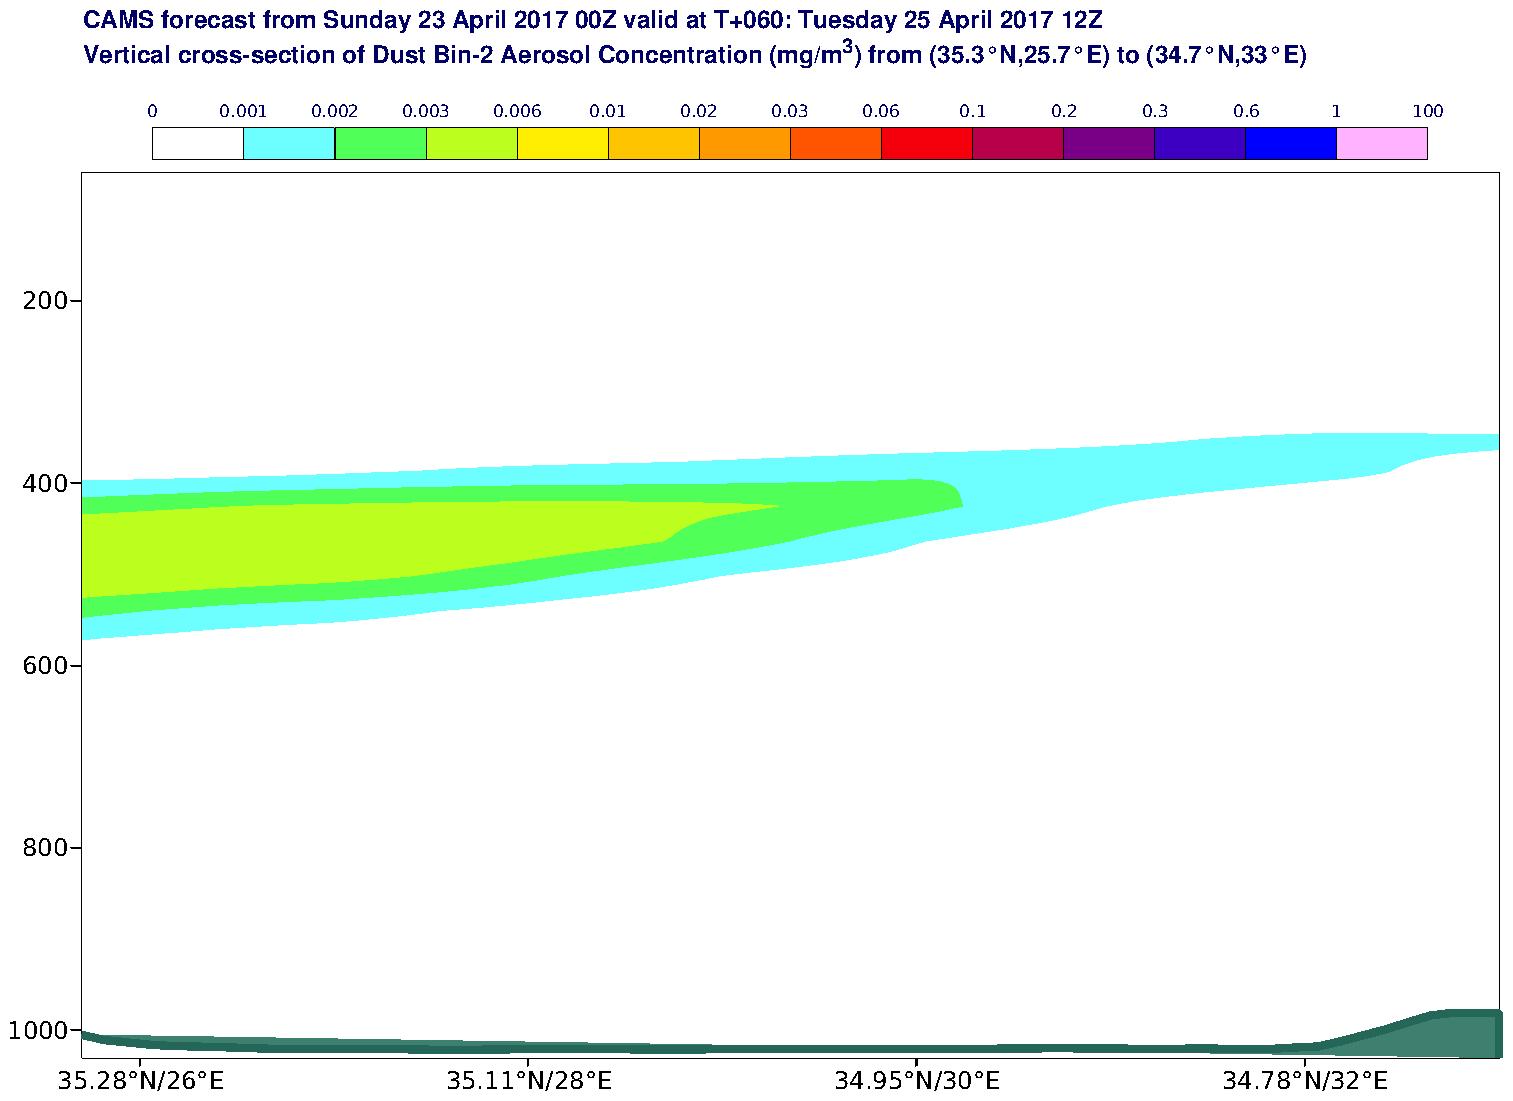 Vertical cross-section of Dust Bin-2 Aerosol Concentration (mg/m3) valid at T60 - 2017-04-25 12:00